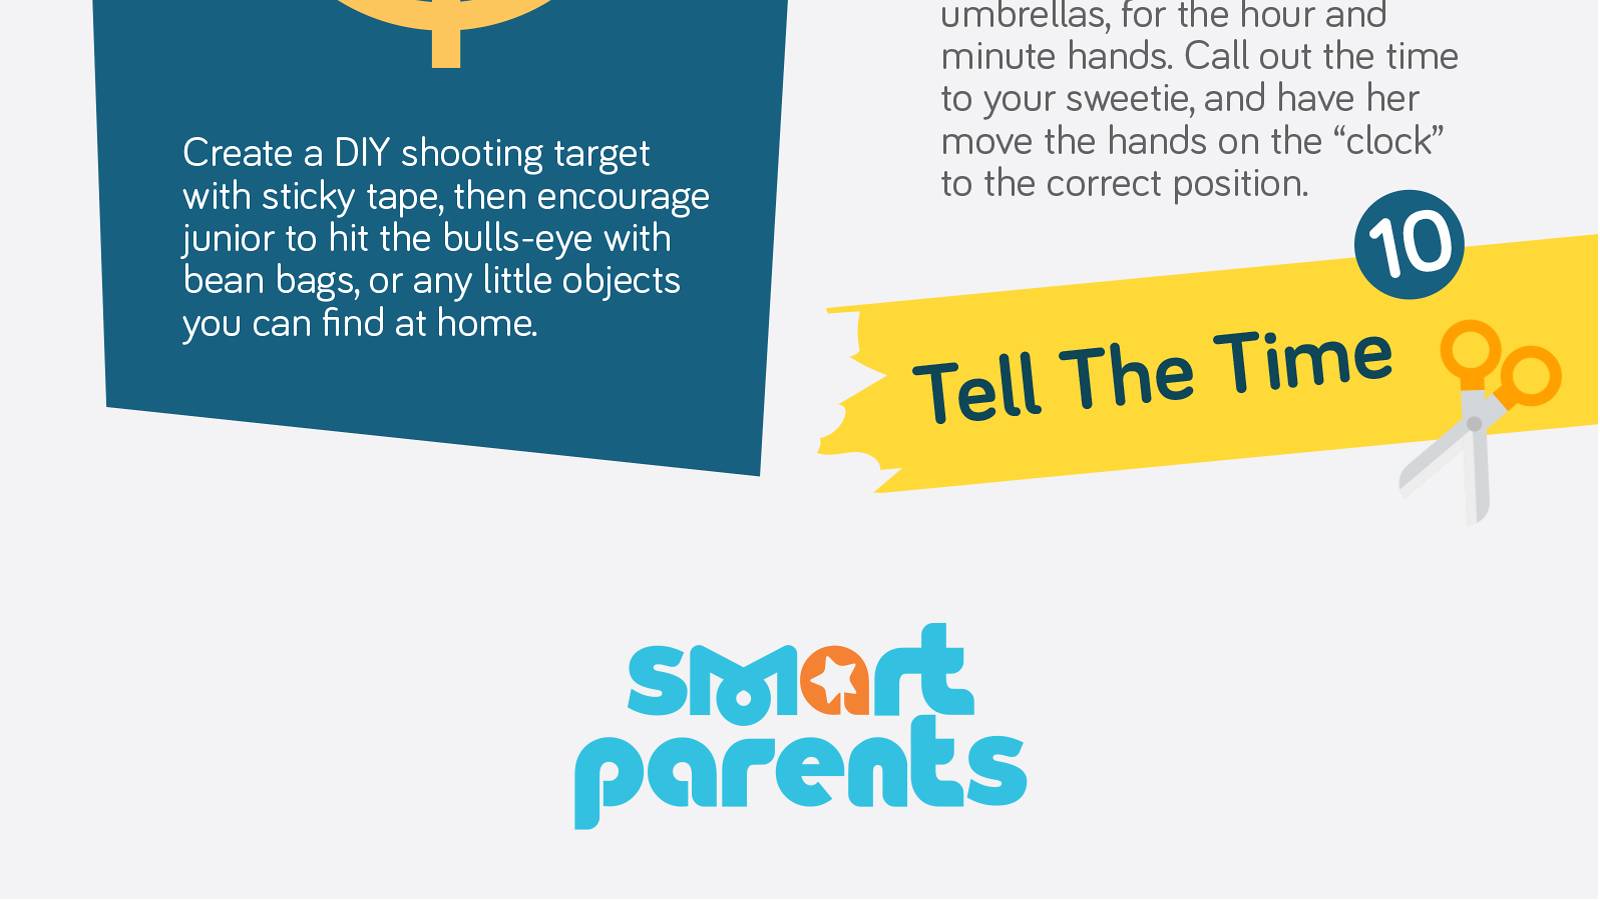 Tots-10-creative-sticky-tape-toddler-activities-[Infographic]_08 (1)